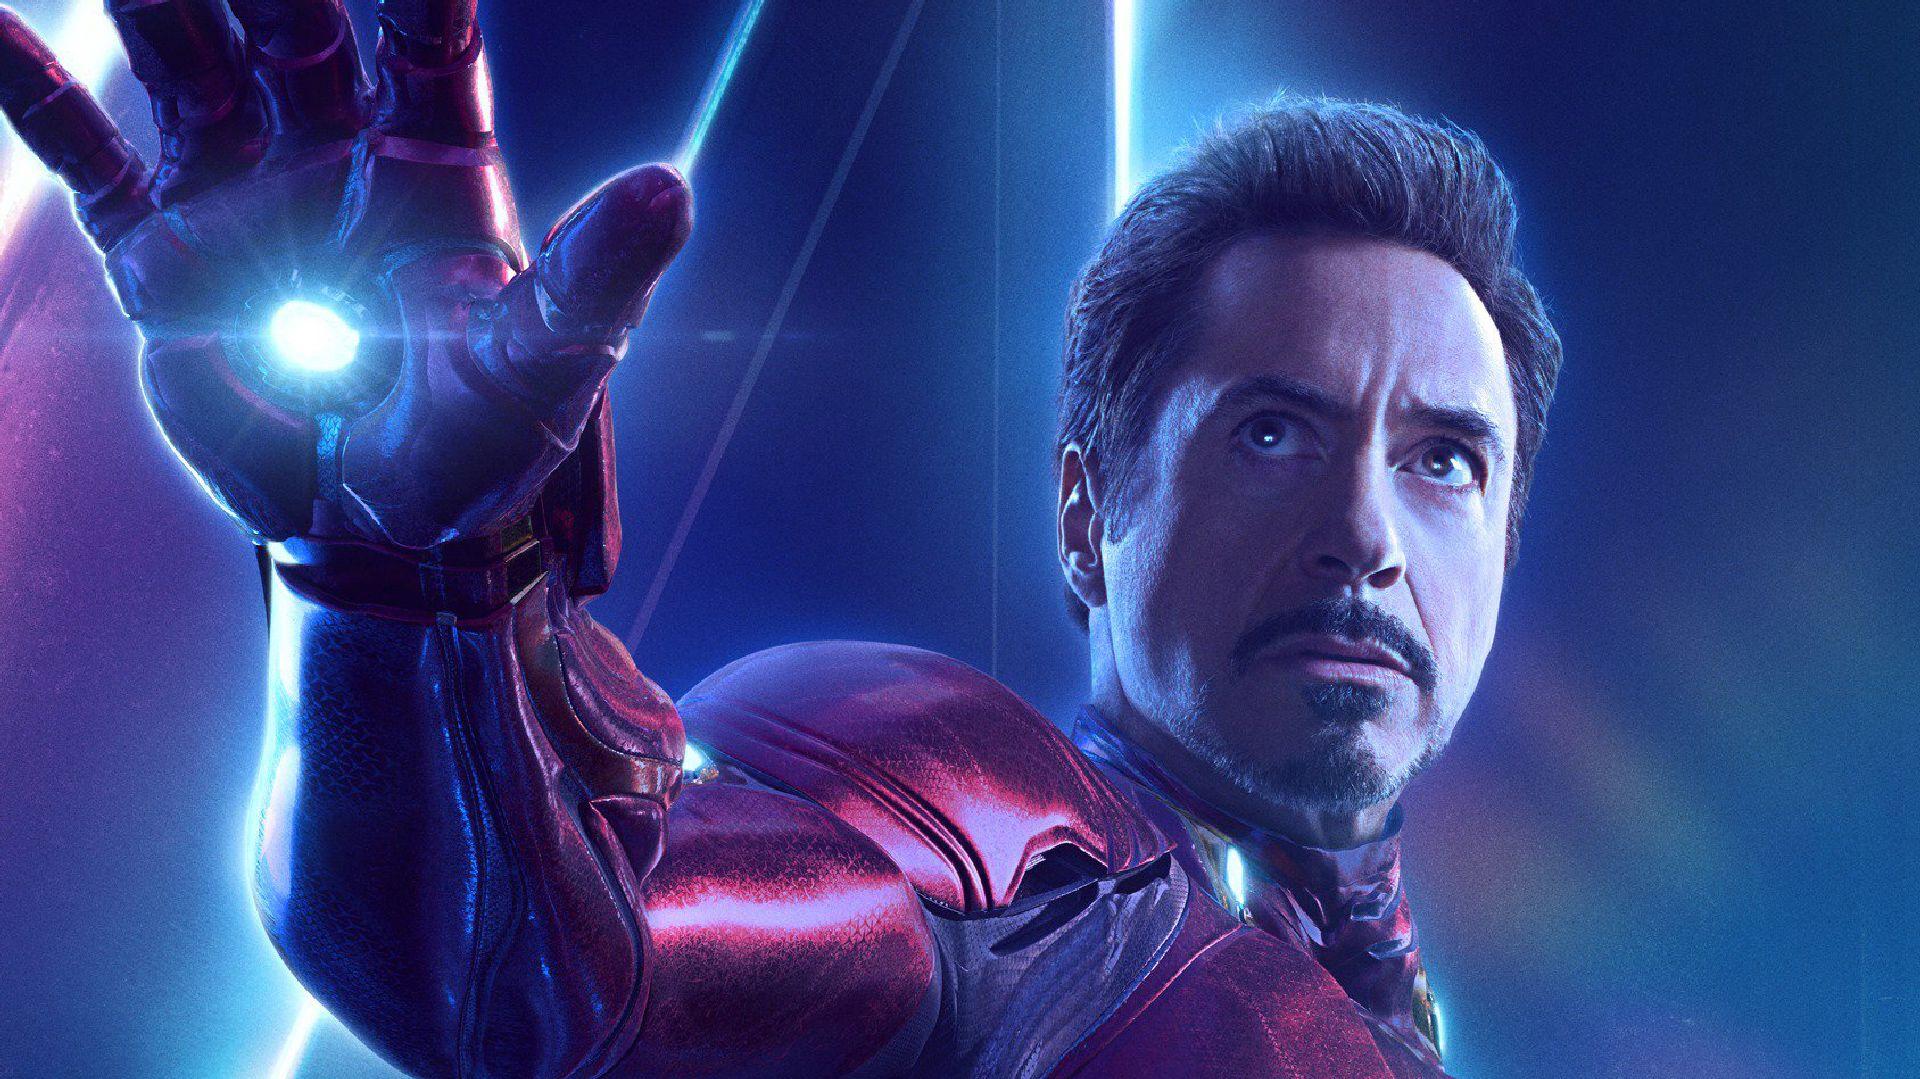 Iron Man In Avengers Infinity War New Poster, HD Movies, 4k